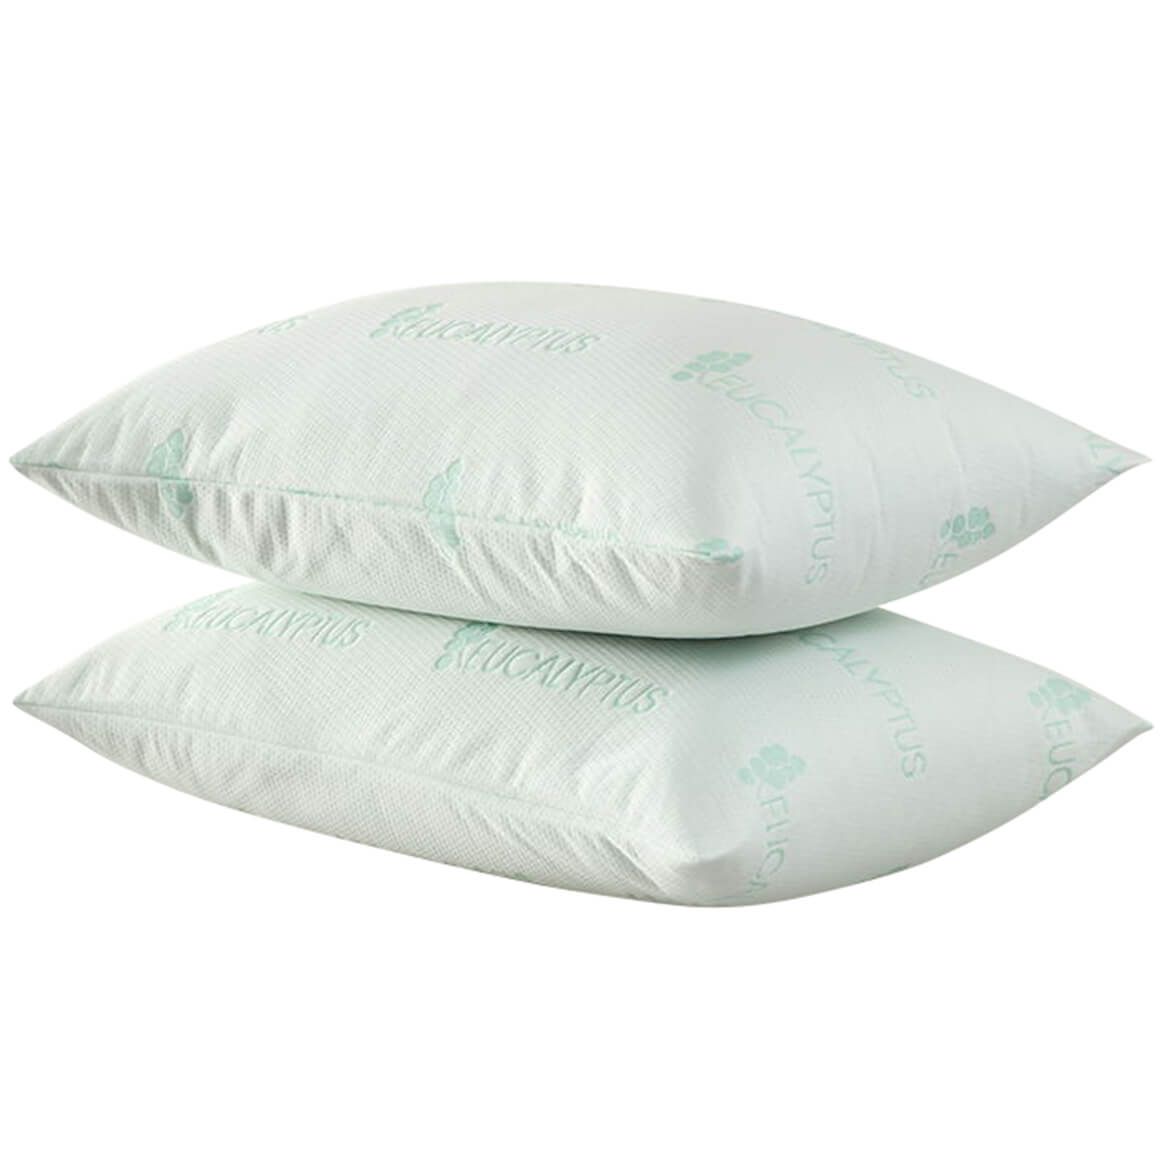 Eucalyptus Scented Pillow Covers by OakRidge™, Set of 2 + '-' + 374633